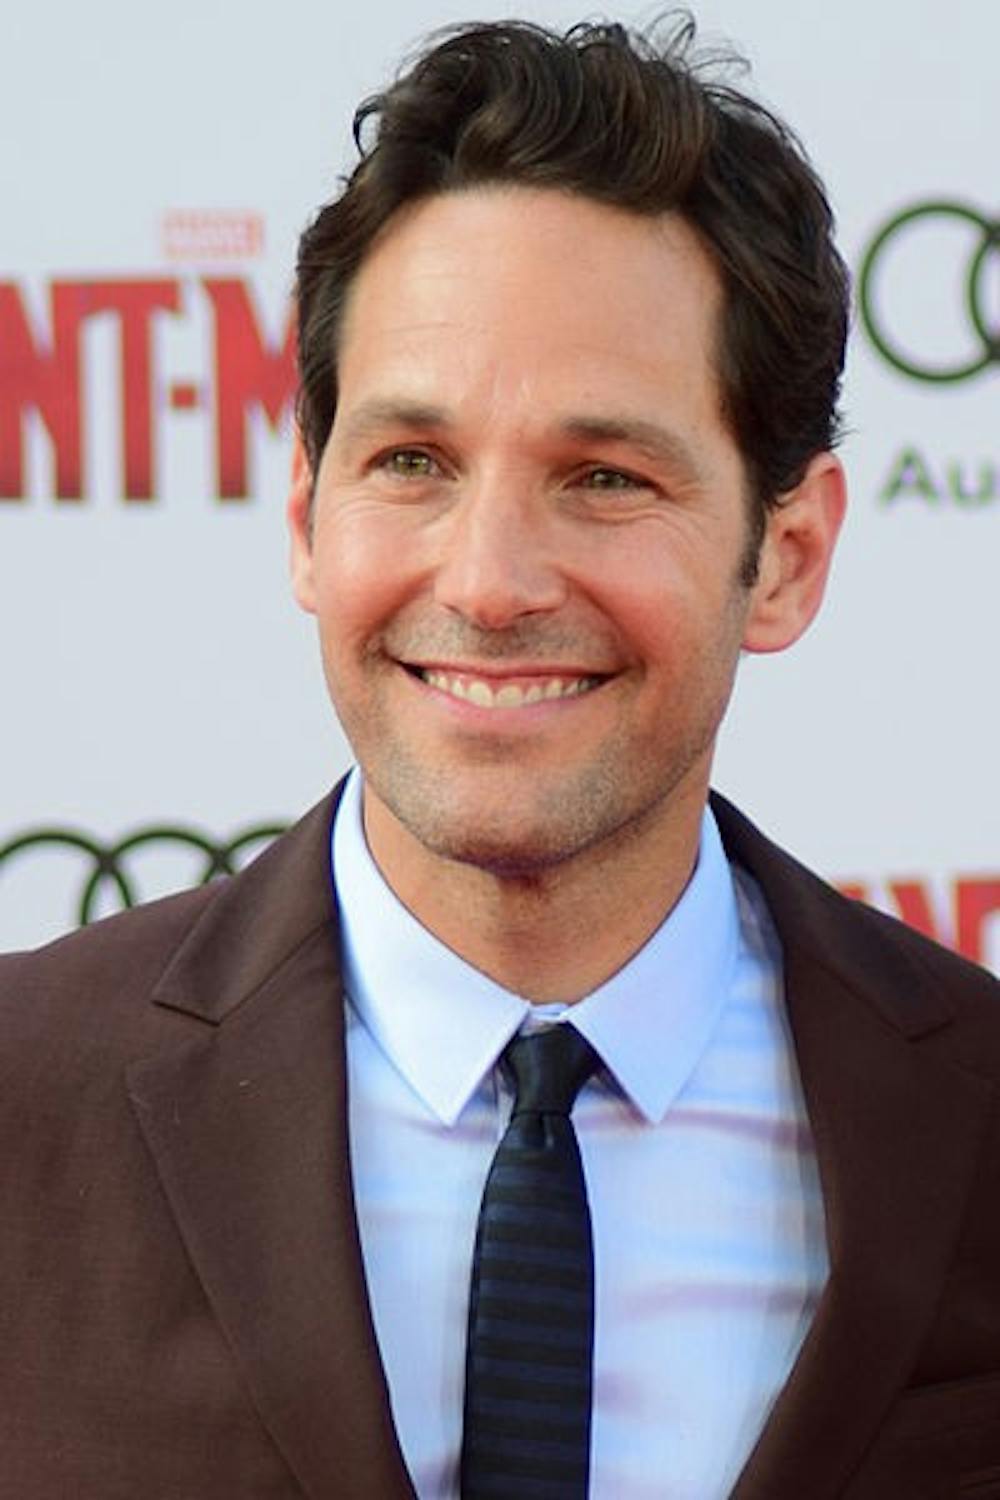 ‘Ant-Man’ crawls into theaters and viewers’ minds